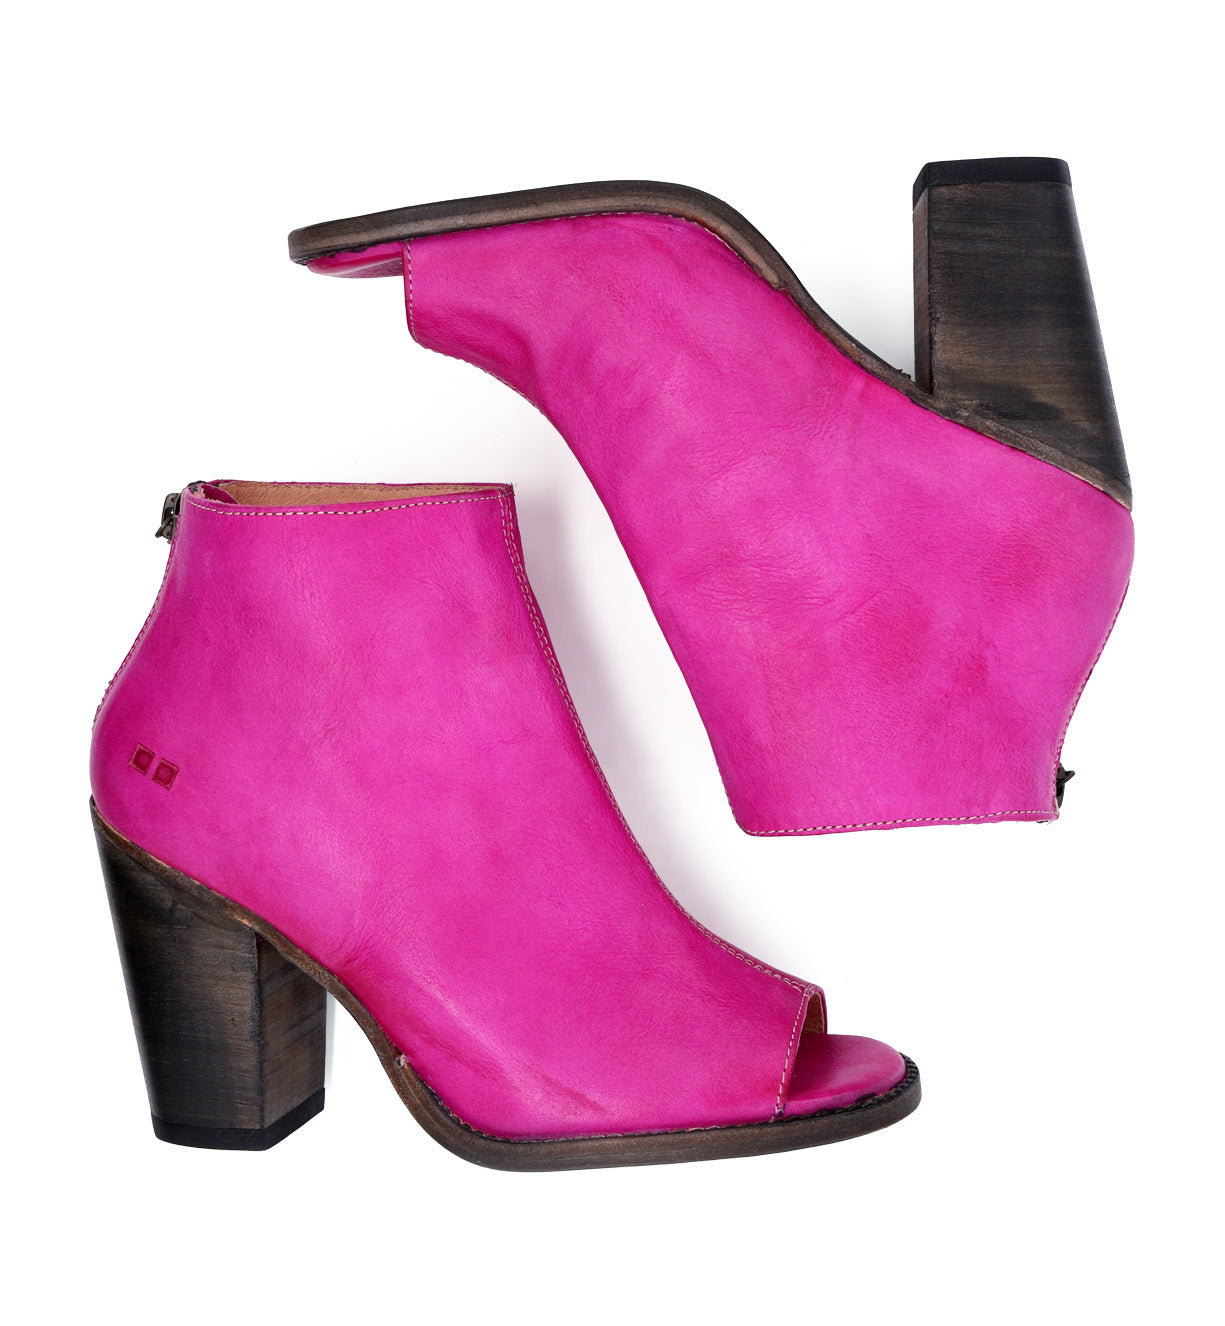 A pair of pink peep toe ankle boots with a wooden heel, the Onset by Bed Stu.